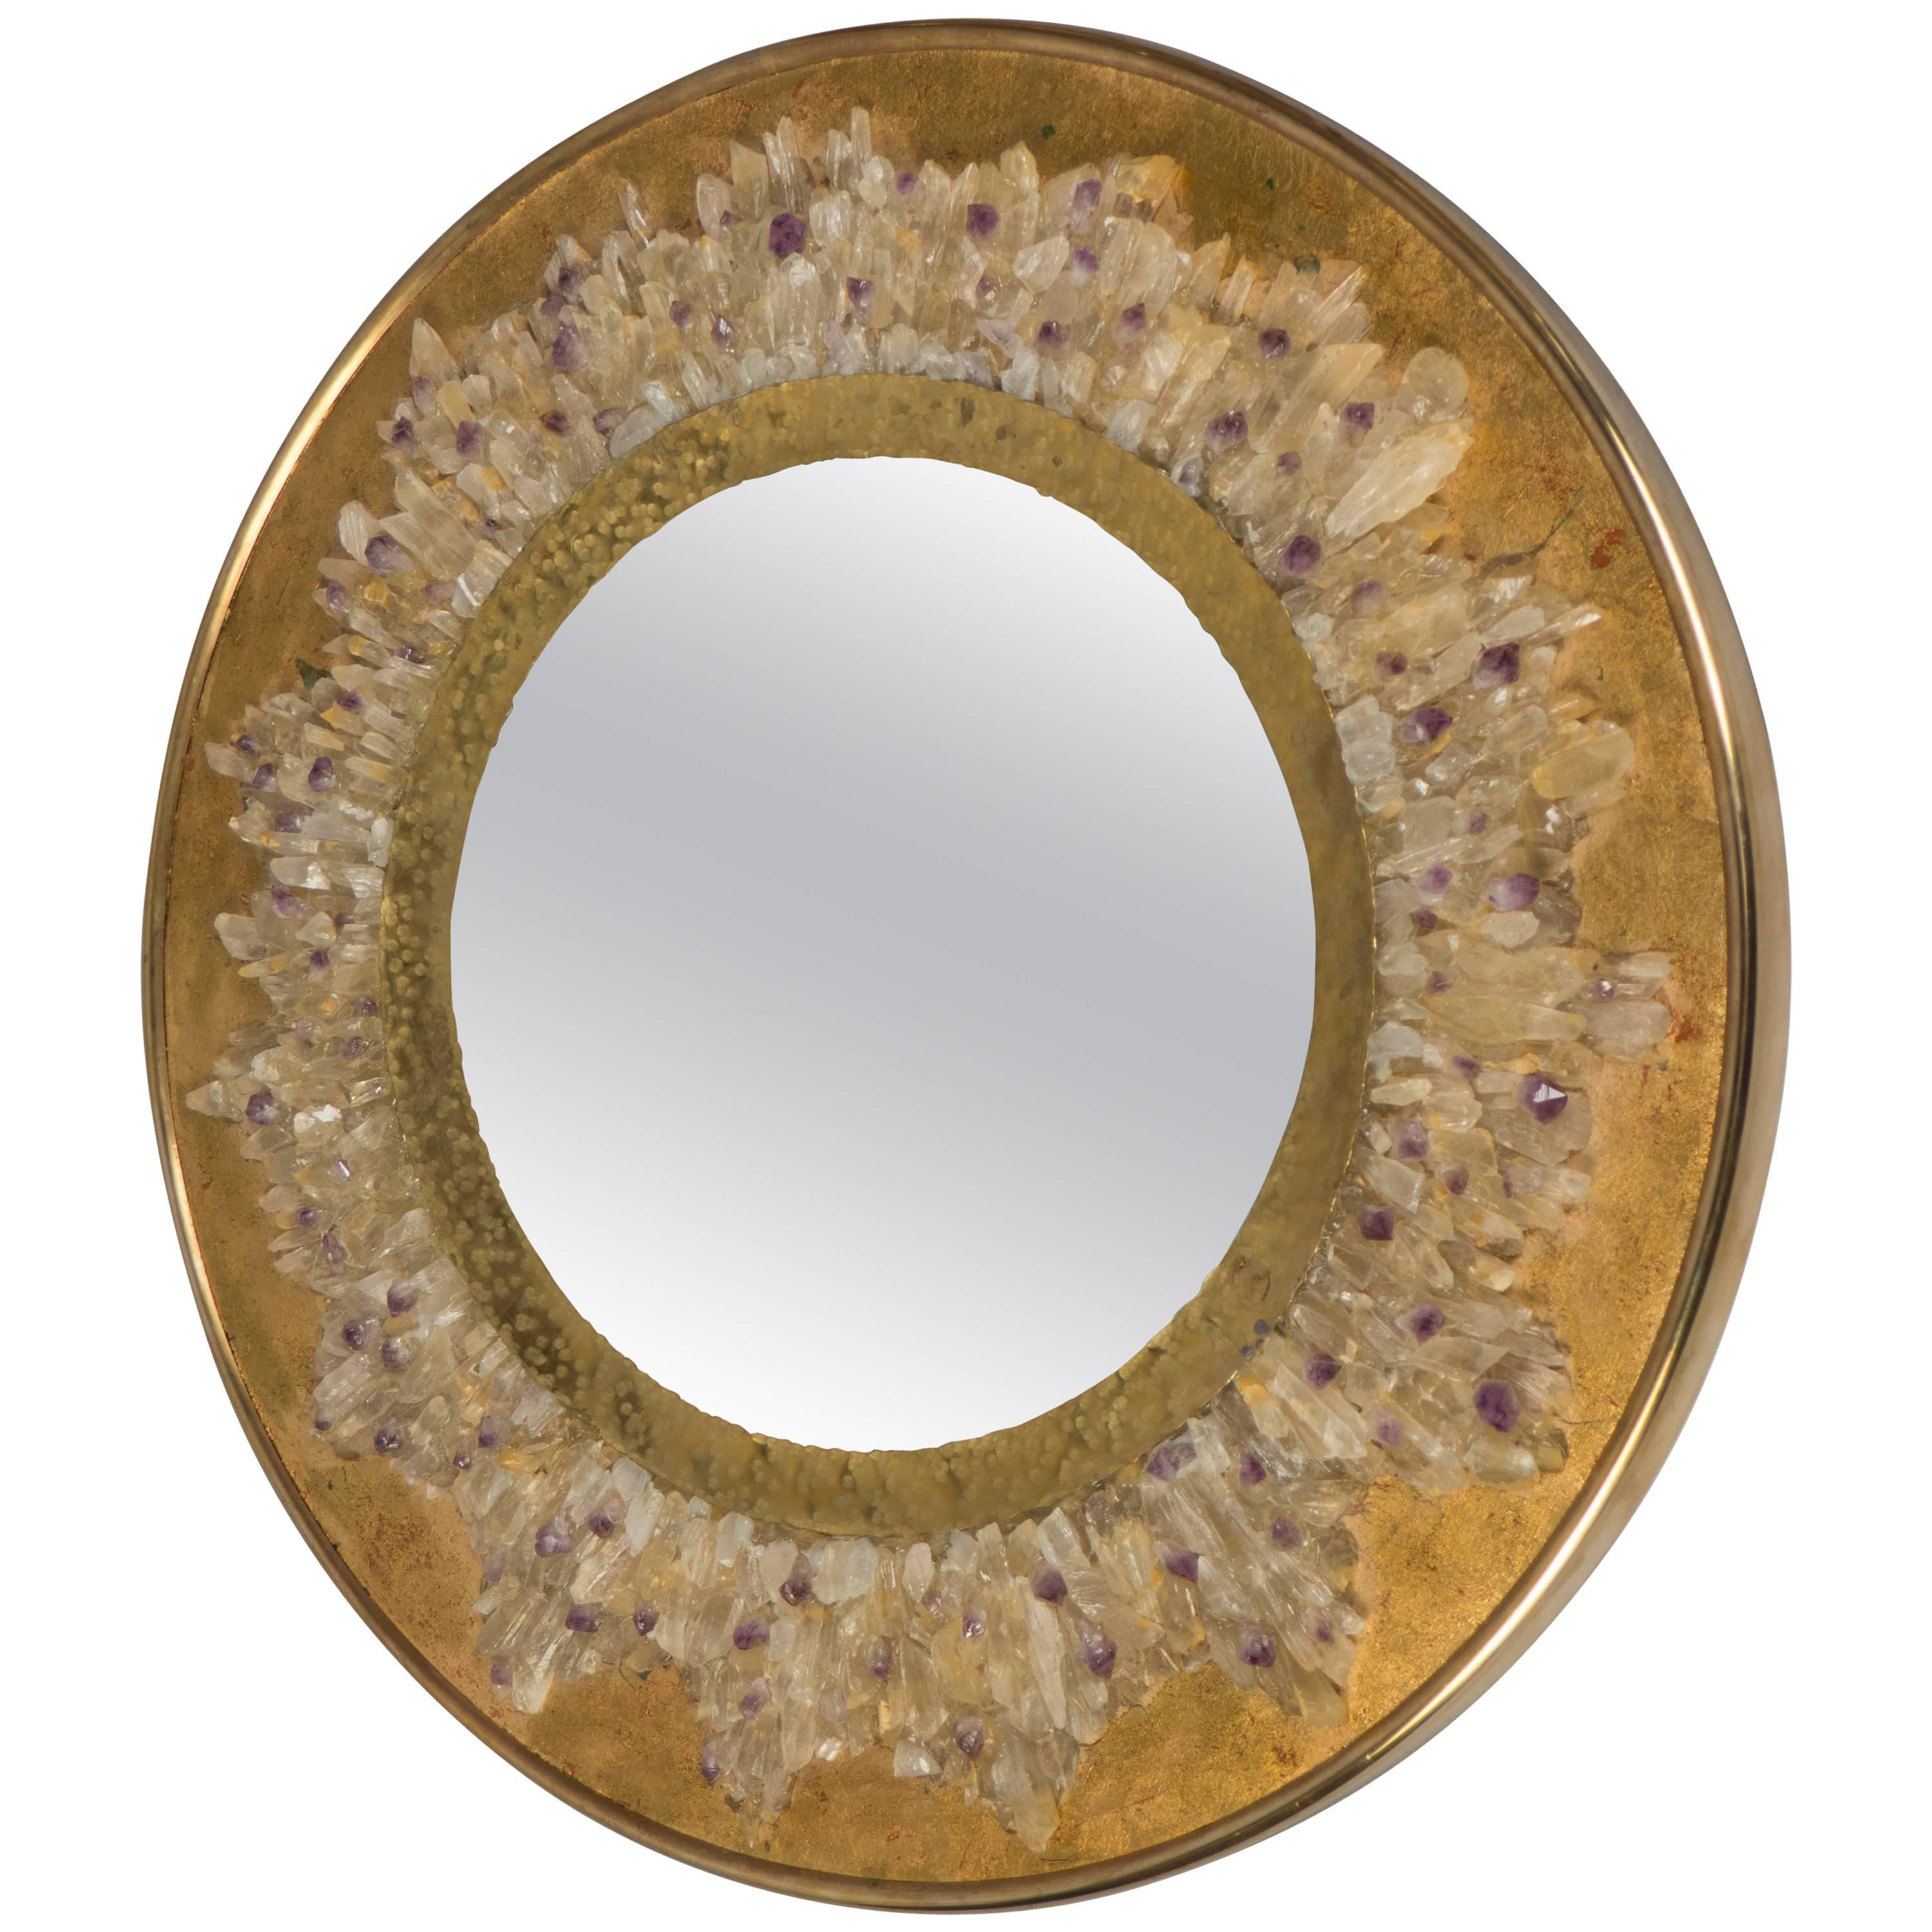 Fish-Eye Mirror with Quartz Crystals and Hammered Brass Frame, France, 2017